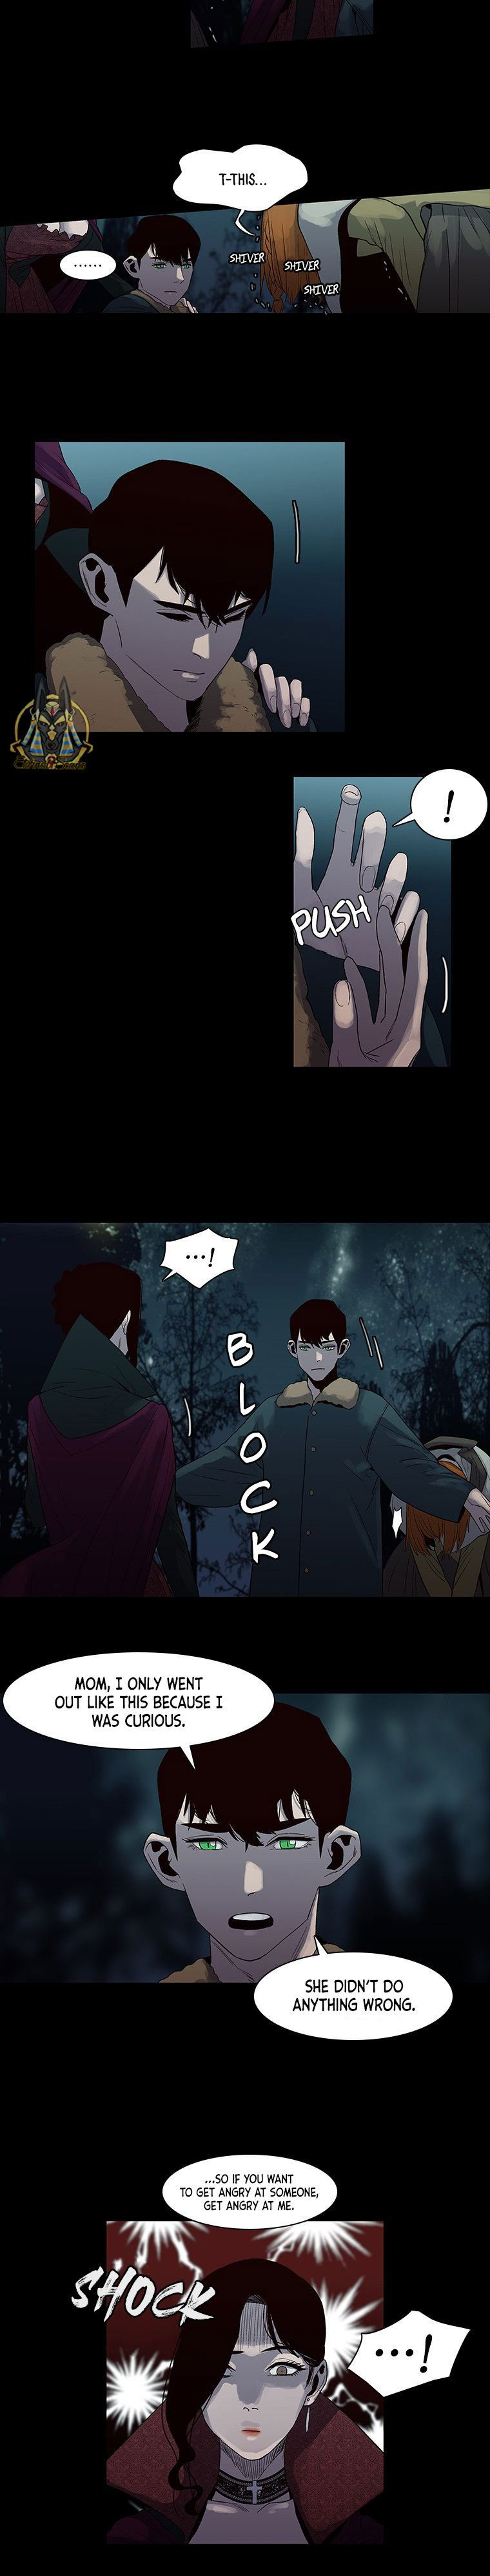 Bathory’s Deadly Curse Chapter 8 page 3